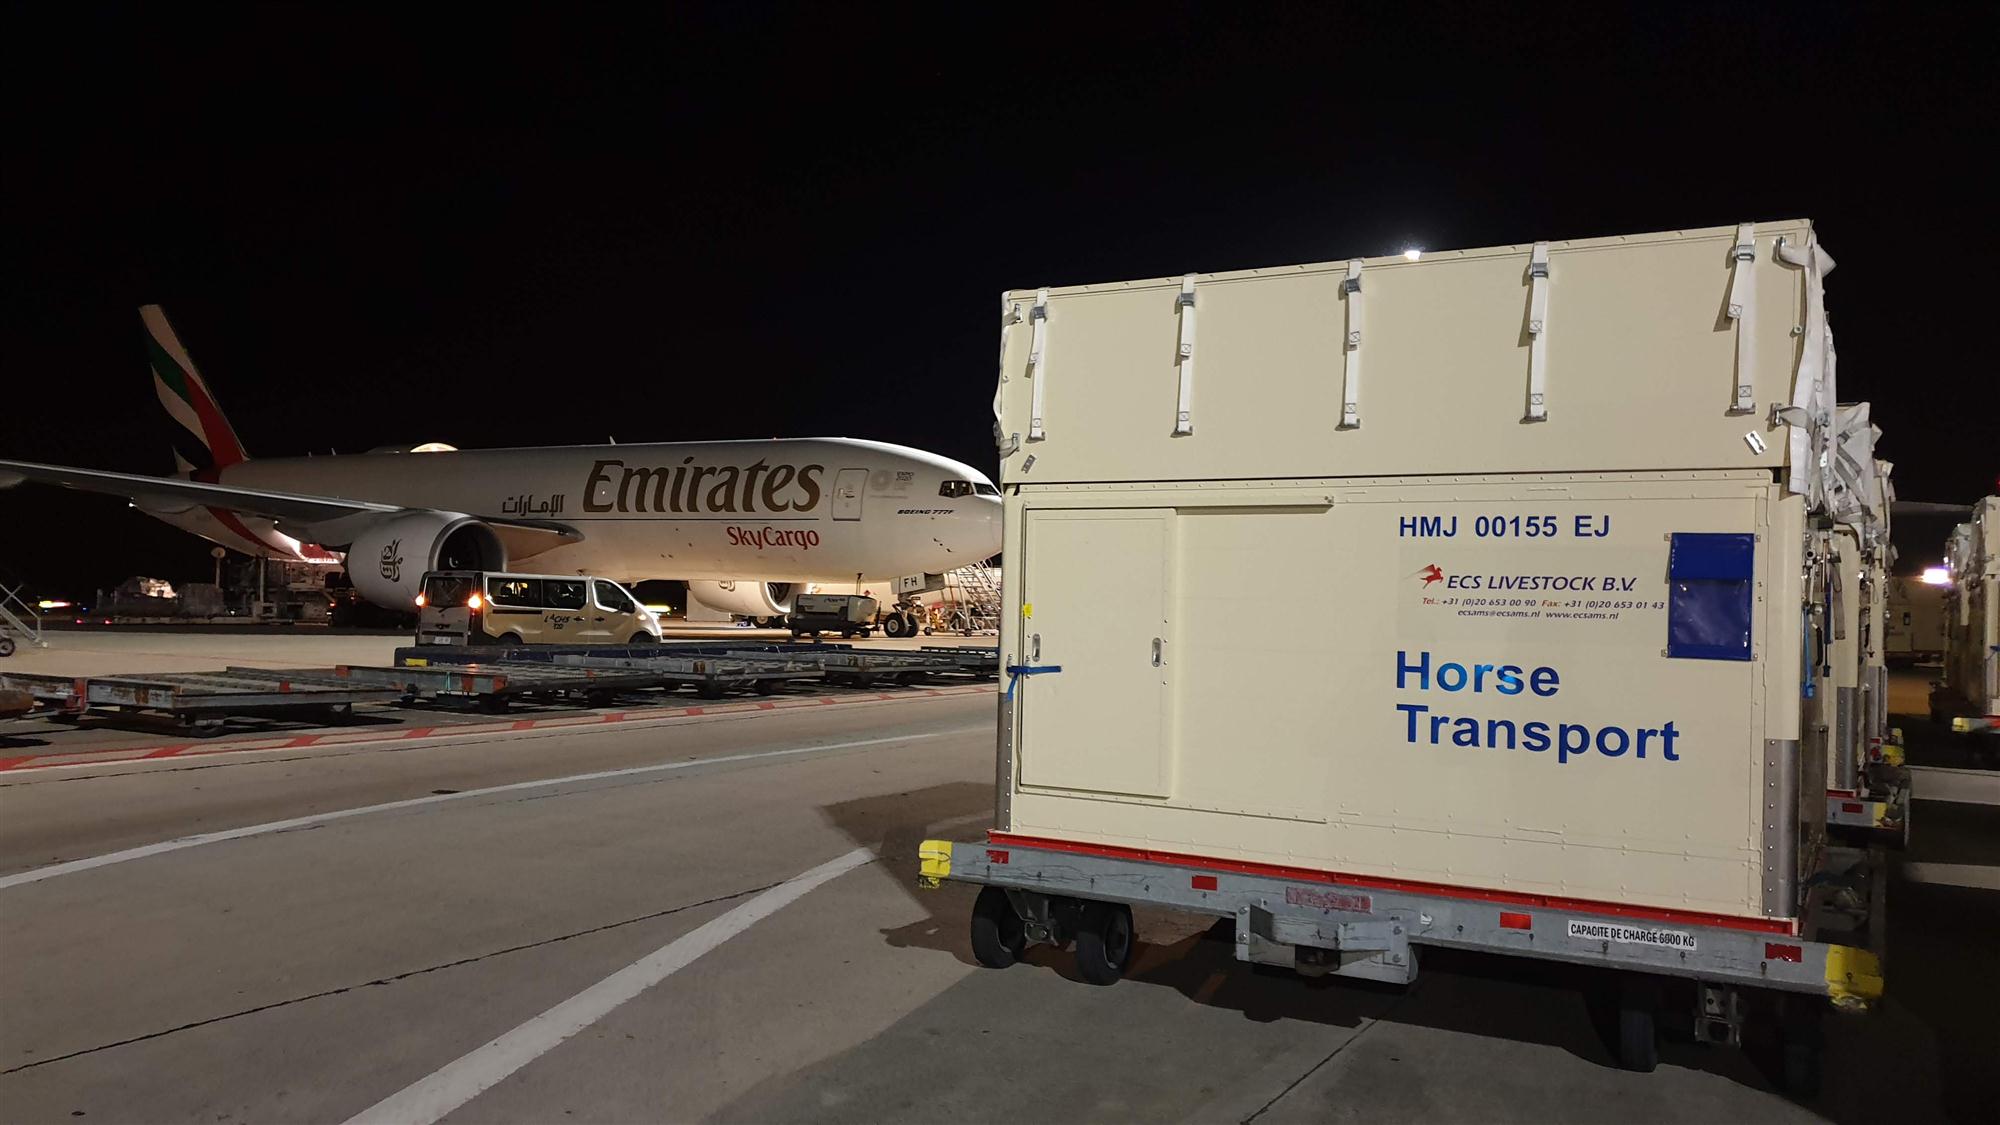 Self Photos / Files - More than 100 champion horses experience Emirates Equine on their journey to Shanghai